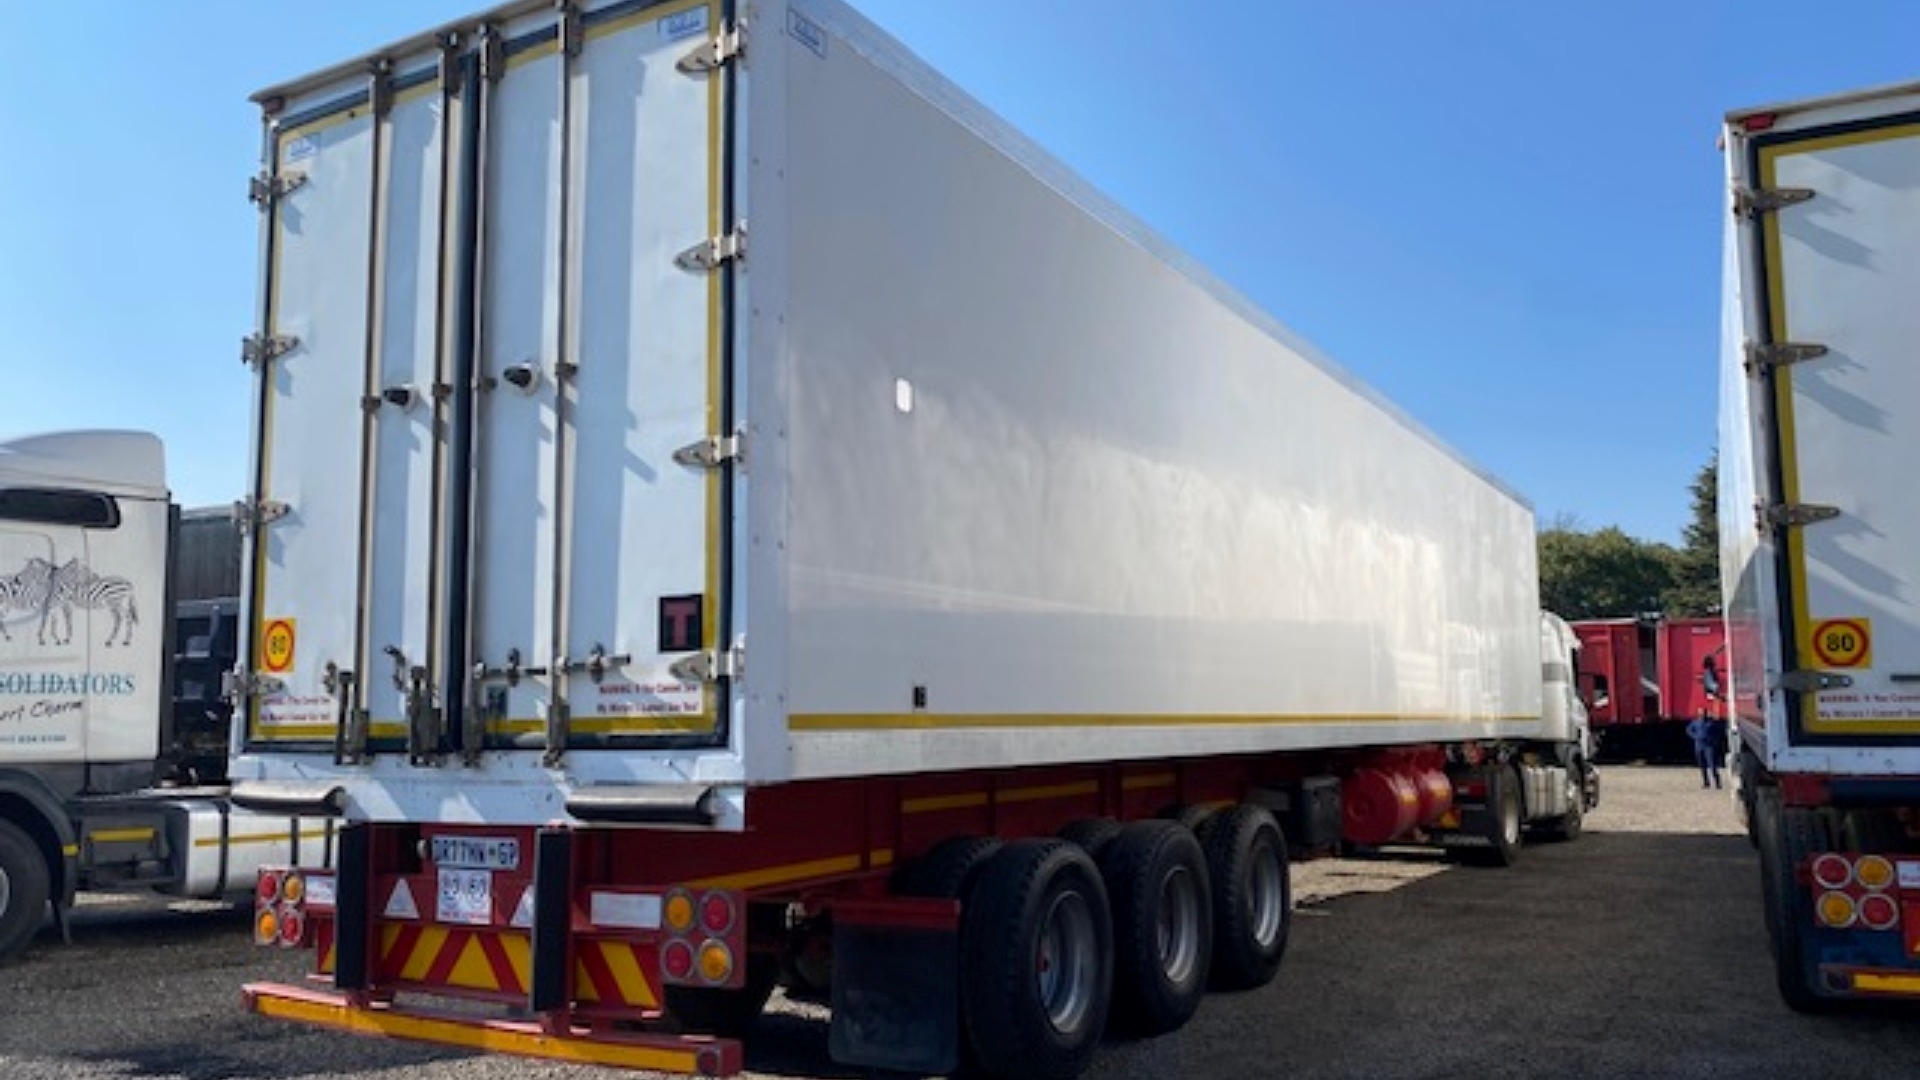 Paramount Trailers Refrigerated trailer 30 Pallet Tri Axle Refrigerator Trailer 2015 for sale by Atlas Truck Centre Pty Ltd | Truck & Trailer Marketplaces